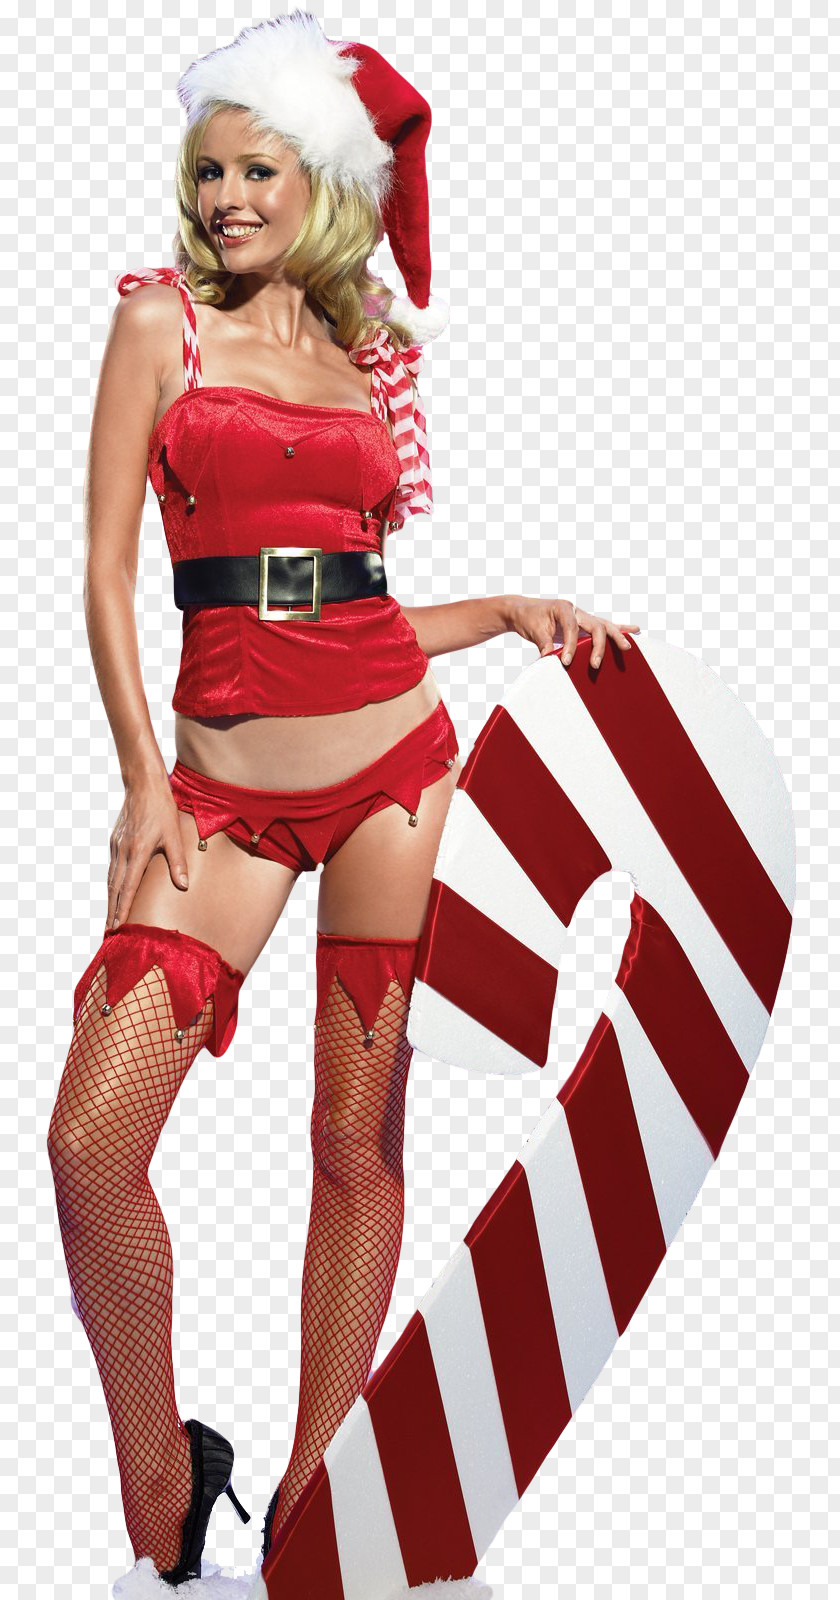 Santa Claus Naughty Or Nice Costume Suit Christmas PNG